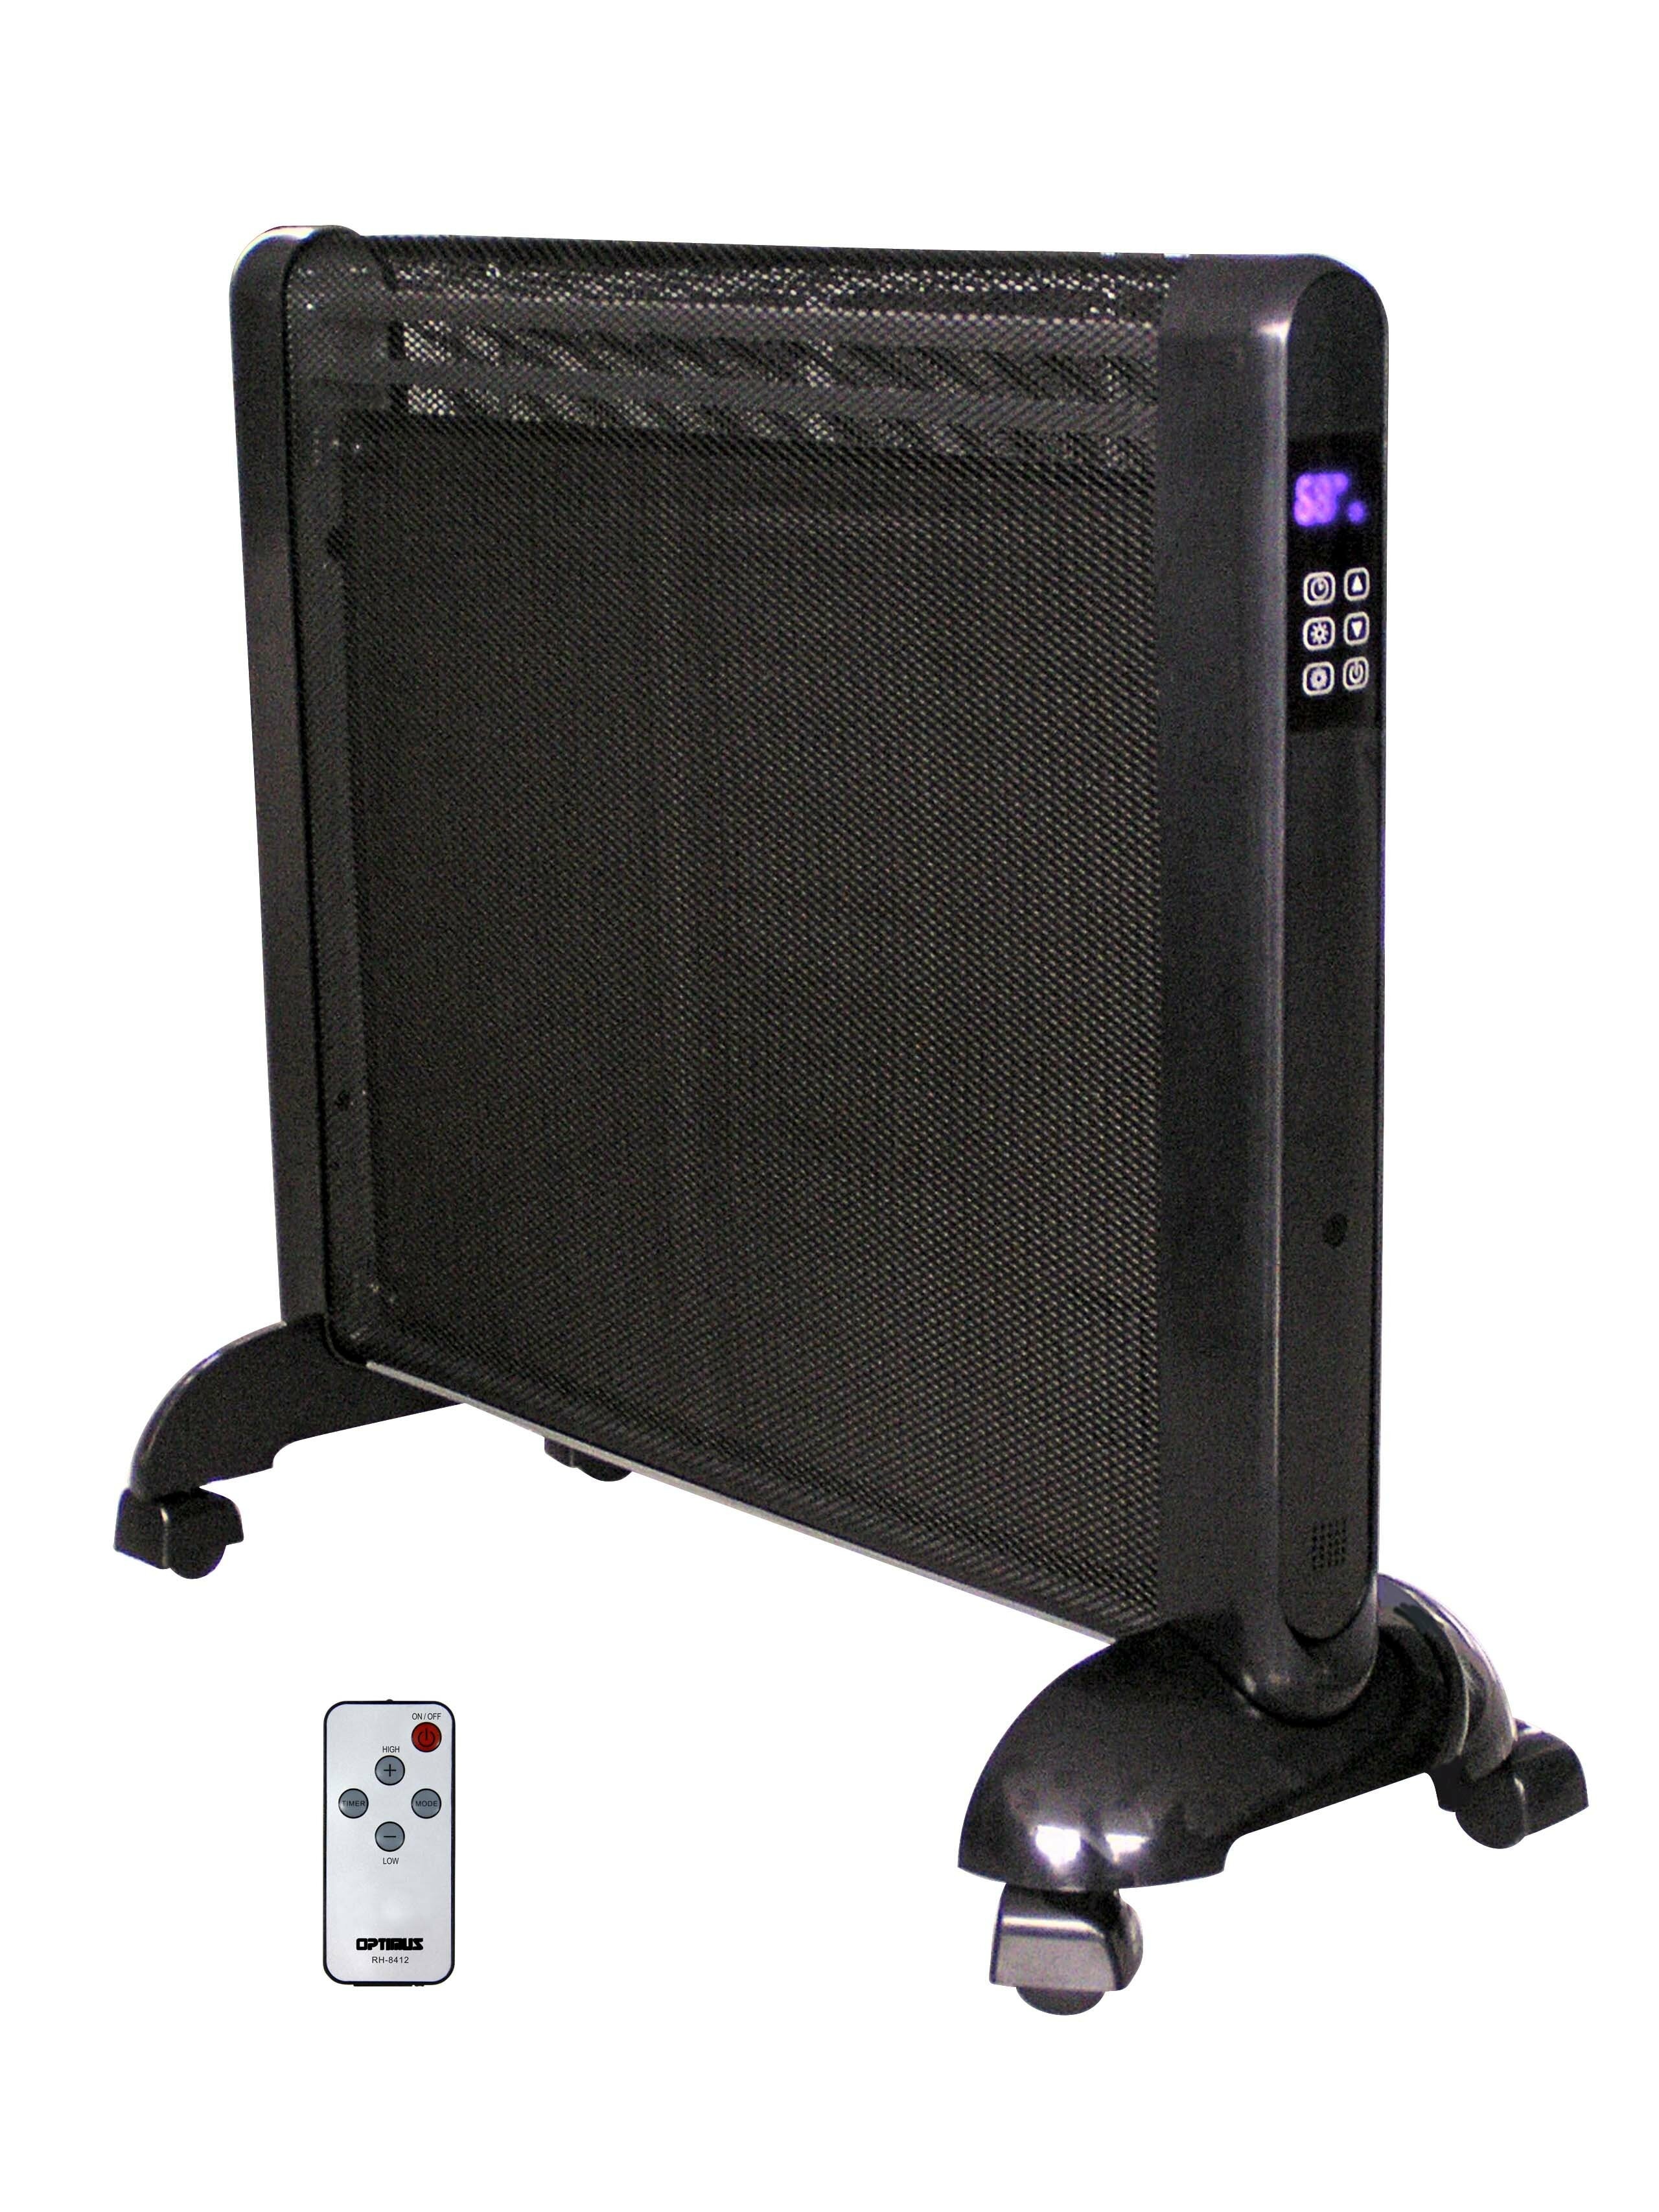 1,500 Watt Portable Electric Convection Panel Heater with Remote